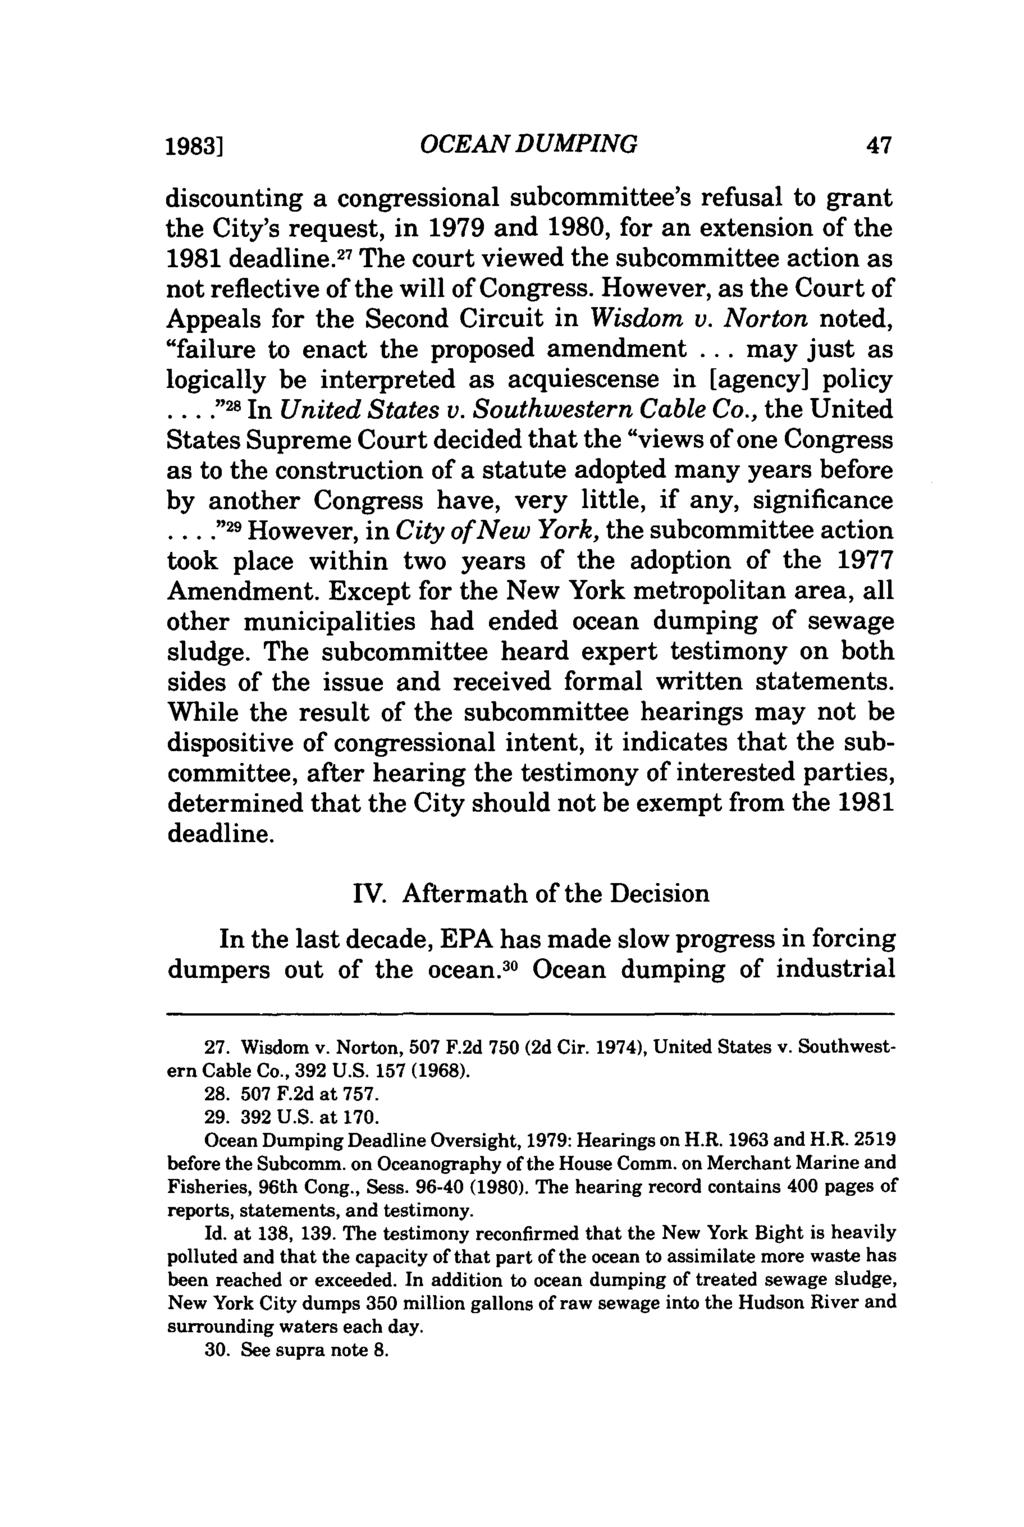 1983] OCEAN DUMPING discounting a congressional subcommittee's refusal to grant the City's request, in 1979 and 1980, for an extension of the 1981 deadline.